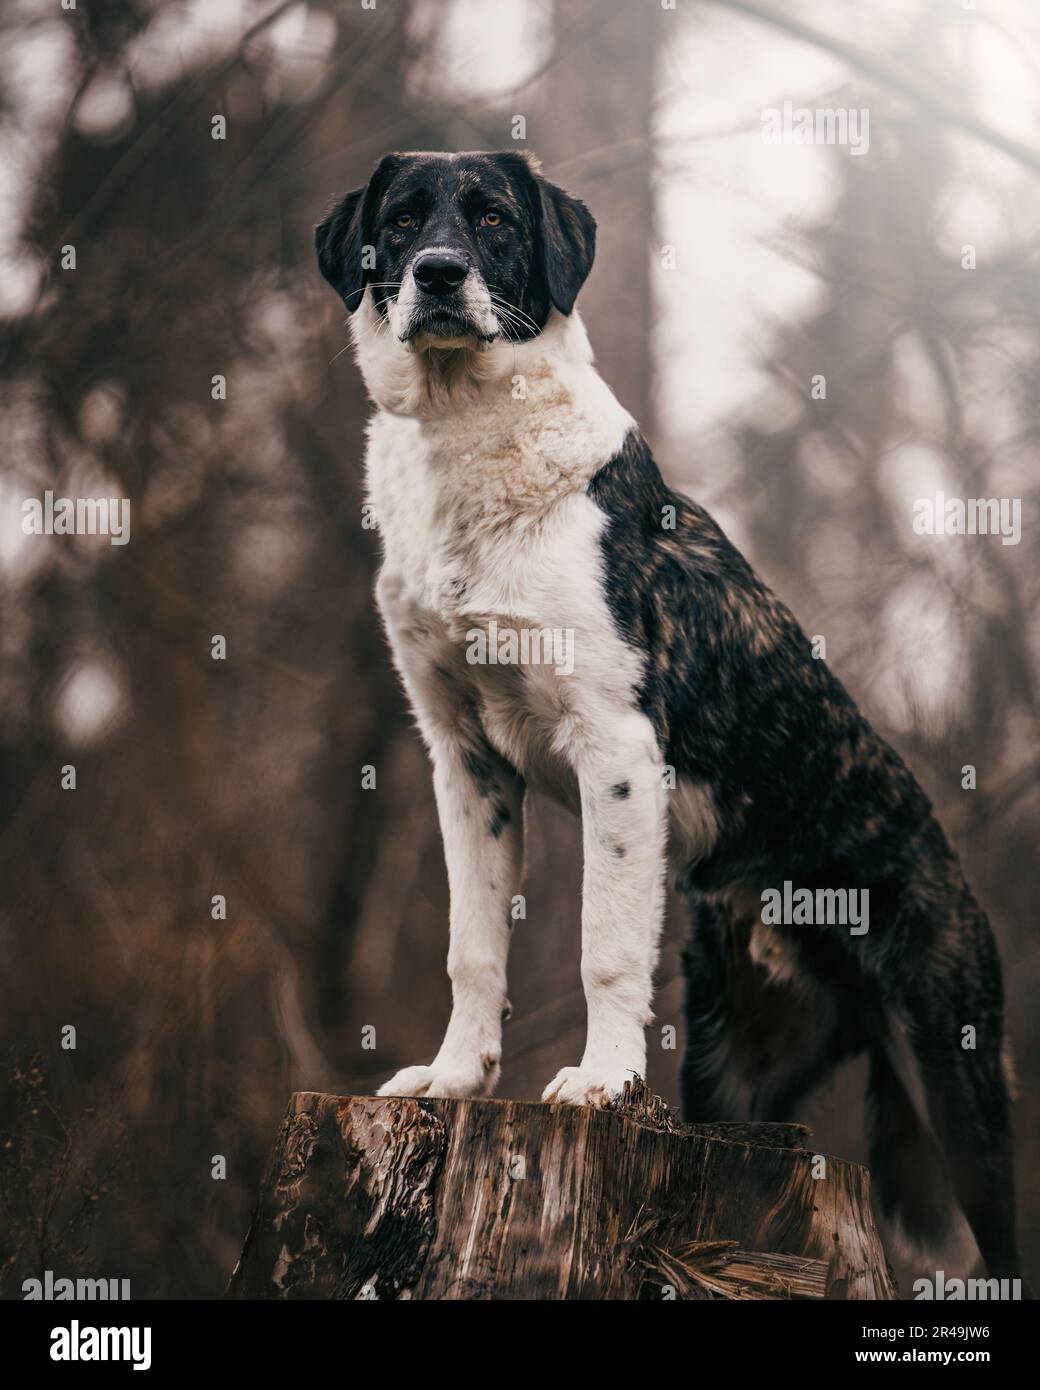 An adorable Rafeiro do Alentejo dog atop a tree stump in a grassy meadow, looking out into the distance Stock Photo